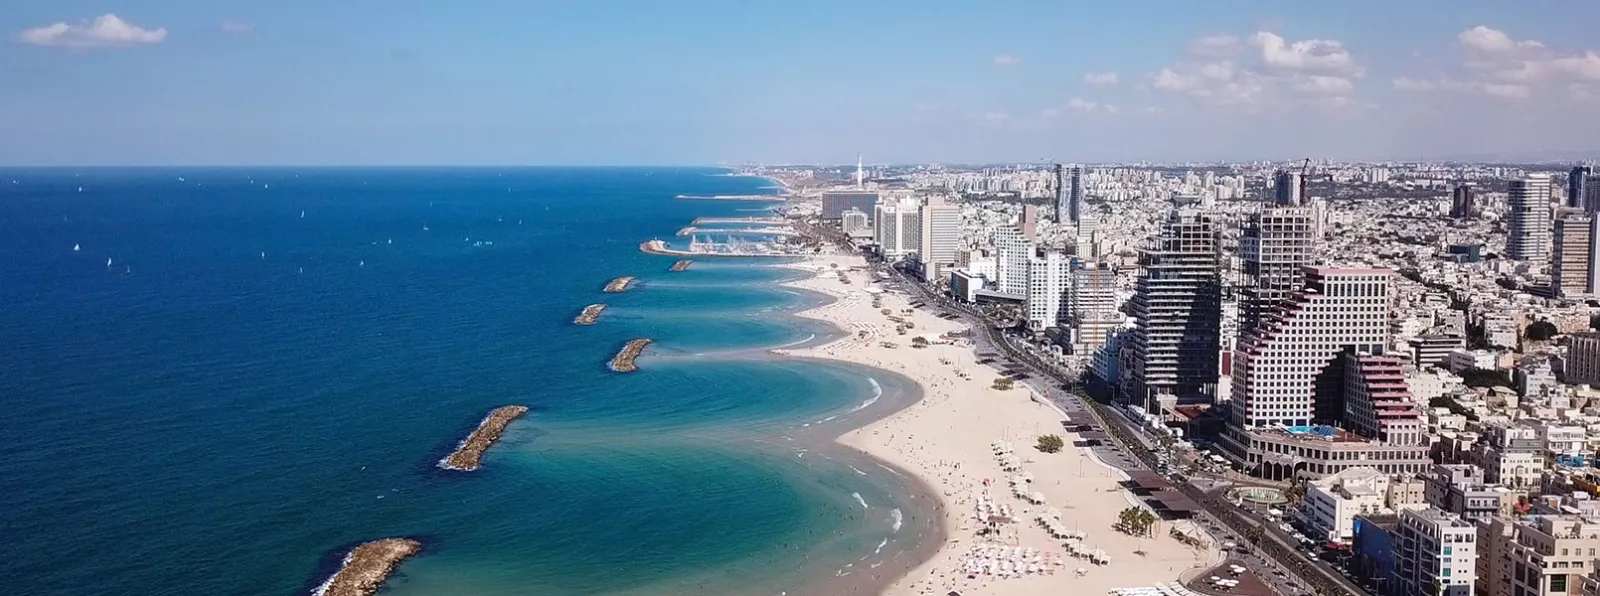 Tobego Beach in Israel, Middle East | Beaches - Rated 3.4